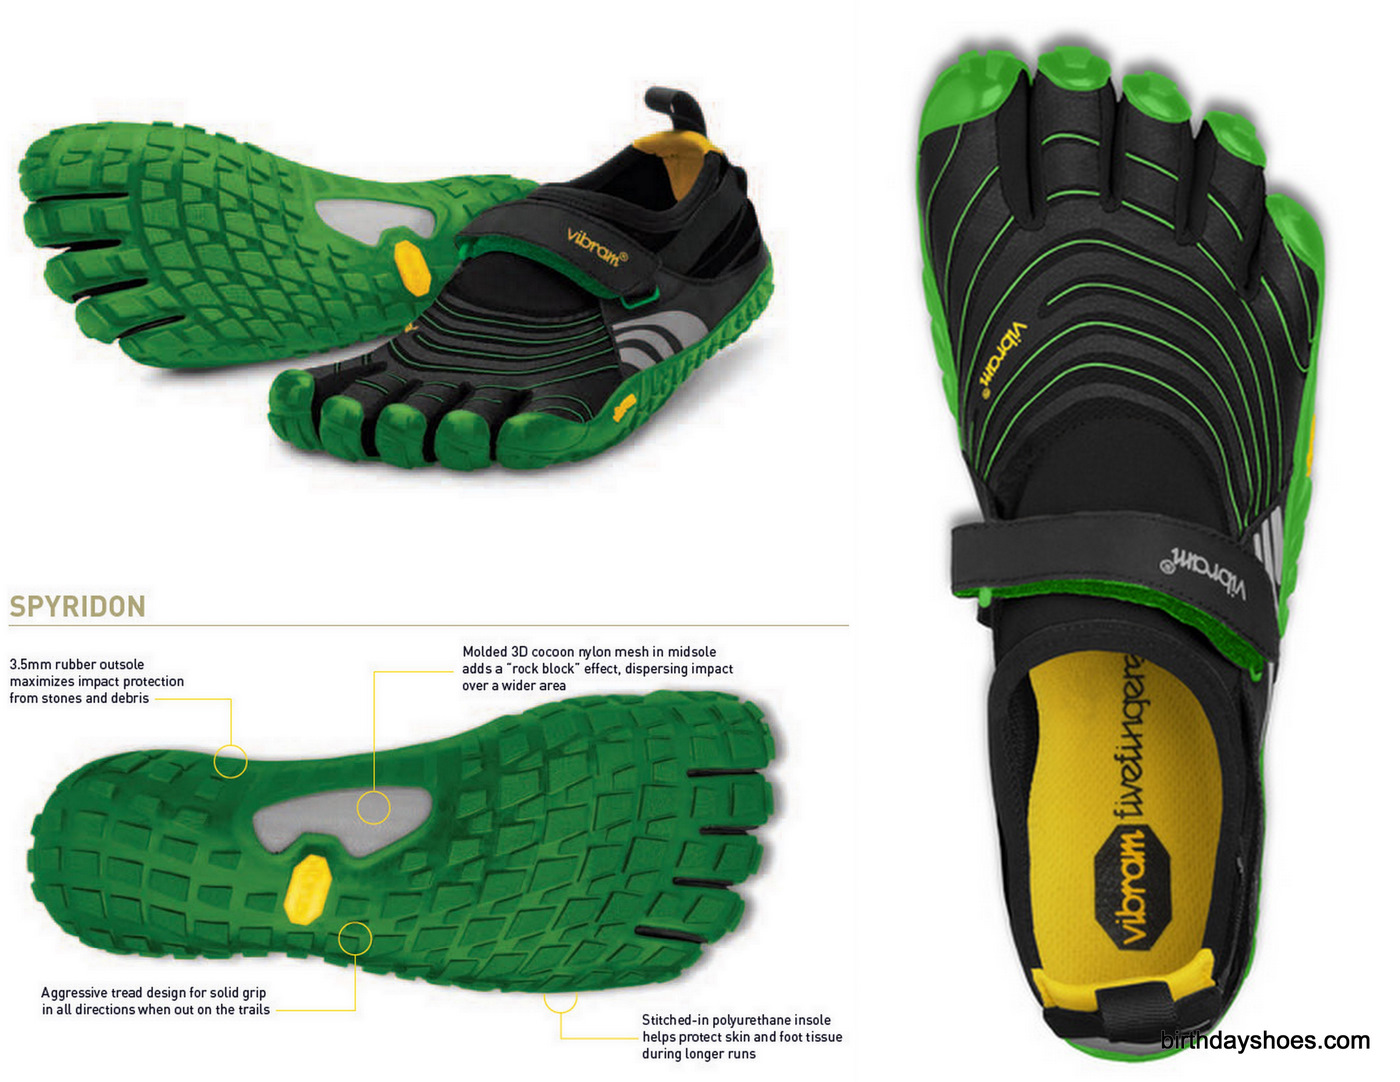 The Spyridon FiveFingers (no "LS") feature a hook and loop closure system - what many FiveFingers fans cut their teeth on.